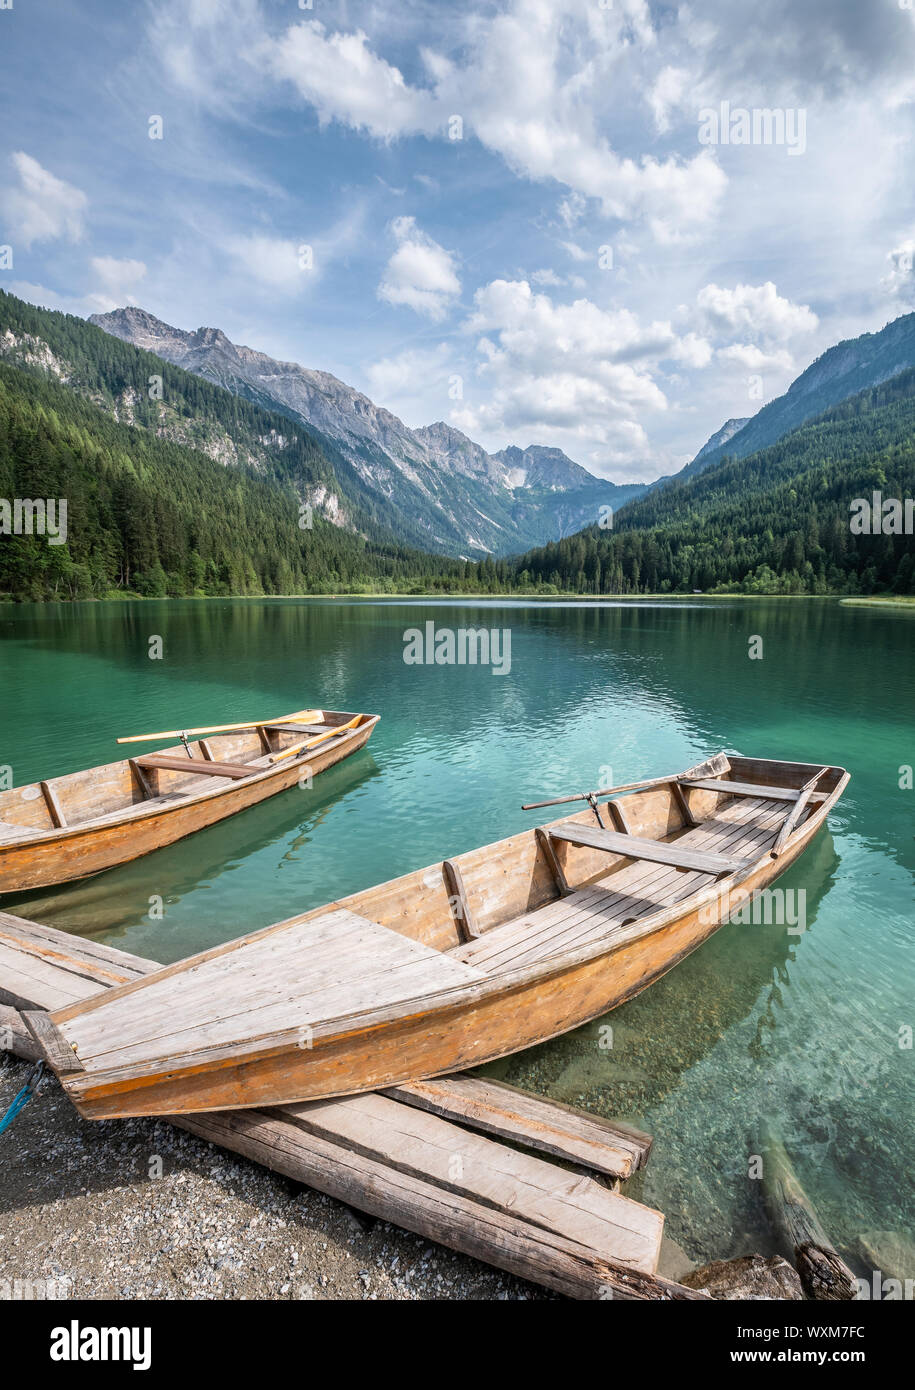 Scenic mountain landscape with turquoise lake and wooden boat at sunny summer day in Austria Alps Stock Photo